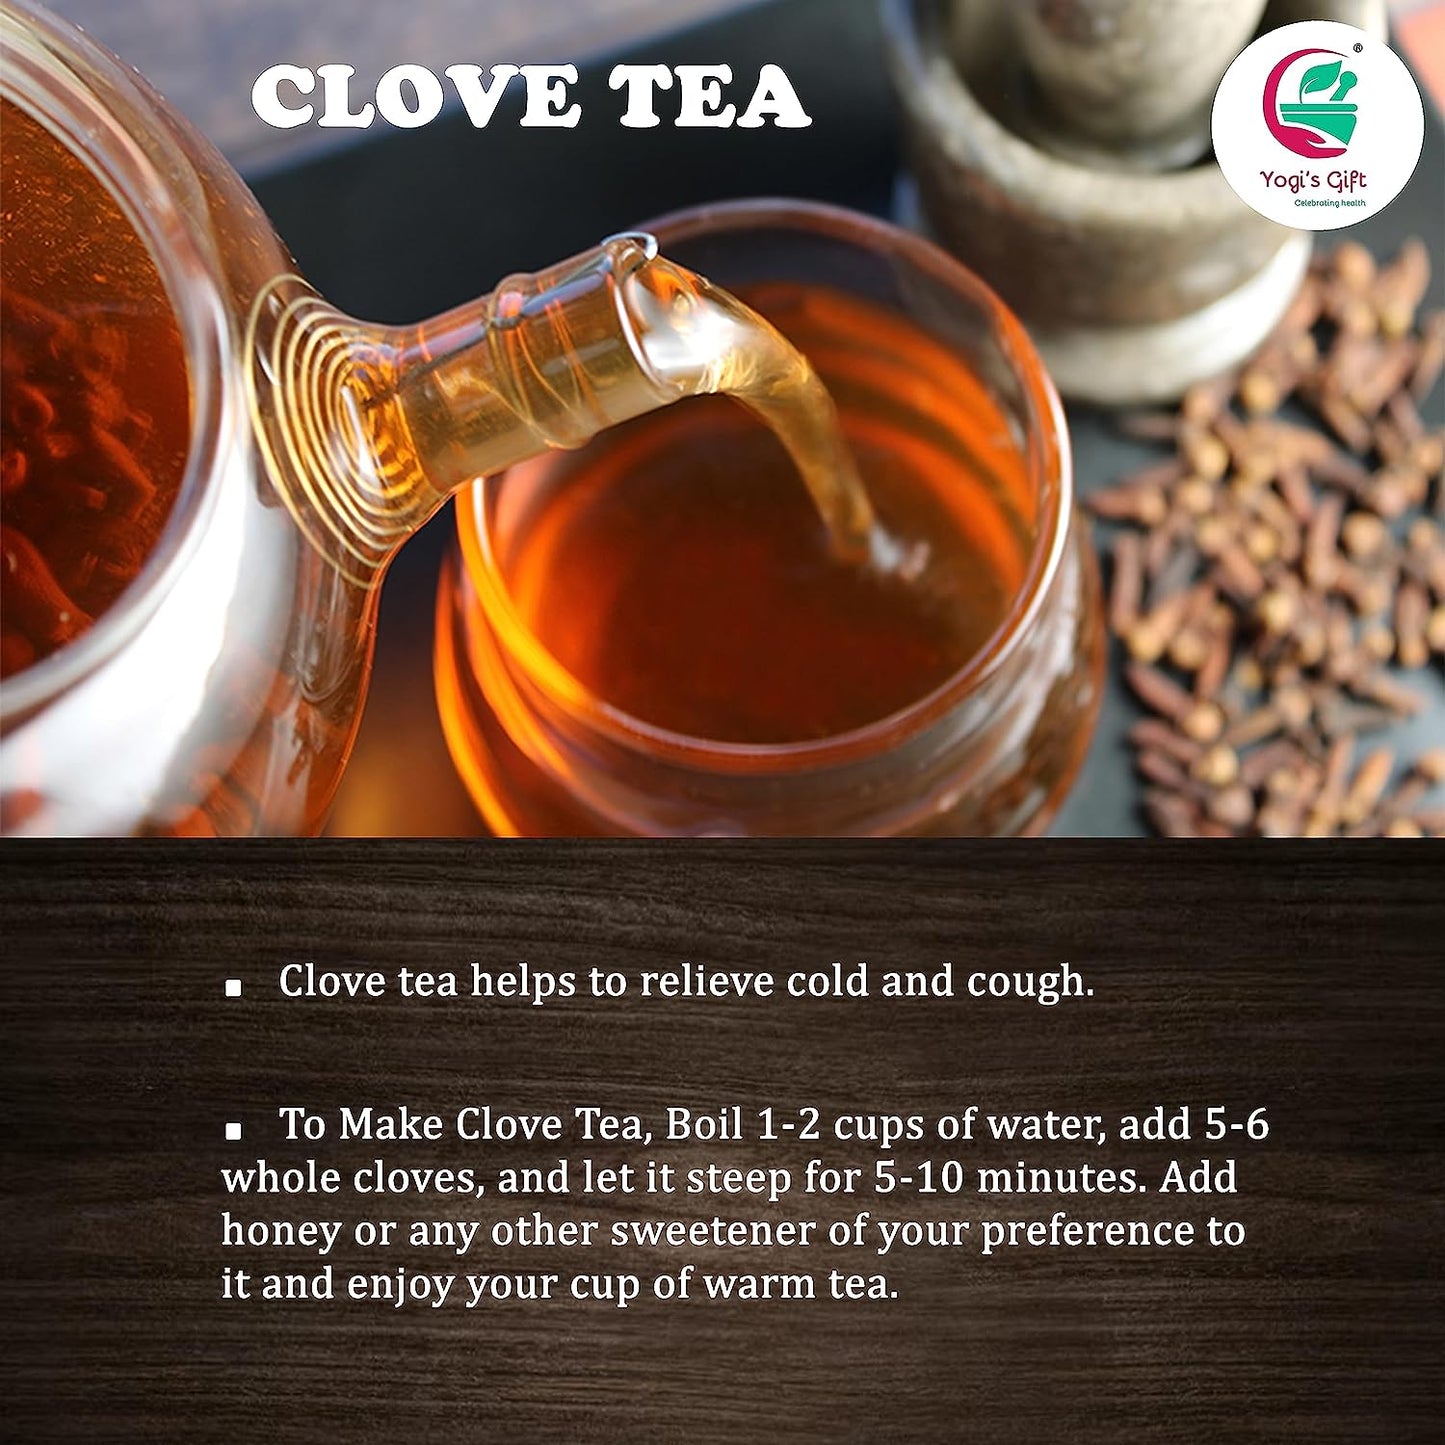 Cloves Whole 4 Oz | Fresh and Flavorful Hot Spice for Tea, Chai, Savory, Desserts and More | Whole Cloves for Oral Health | by Yogi’s Gift®